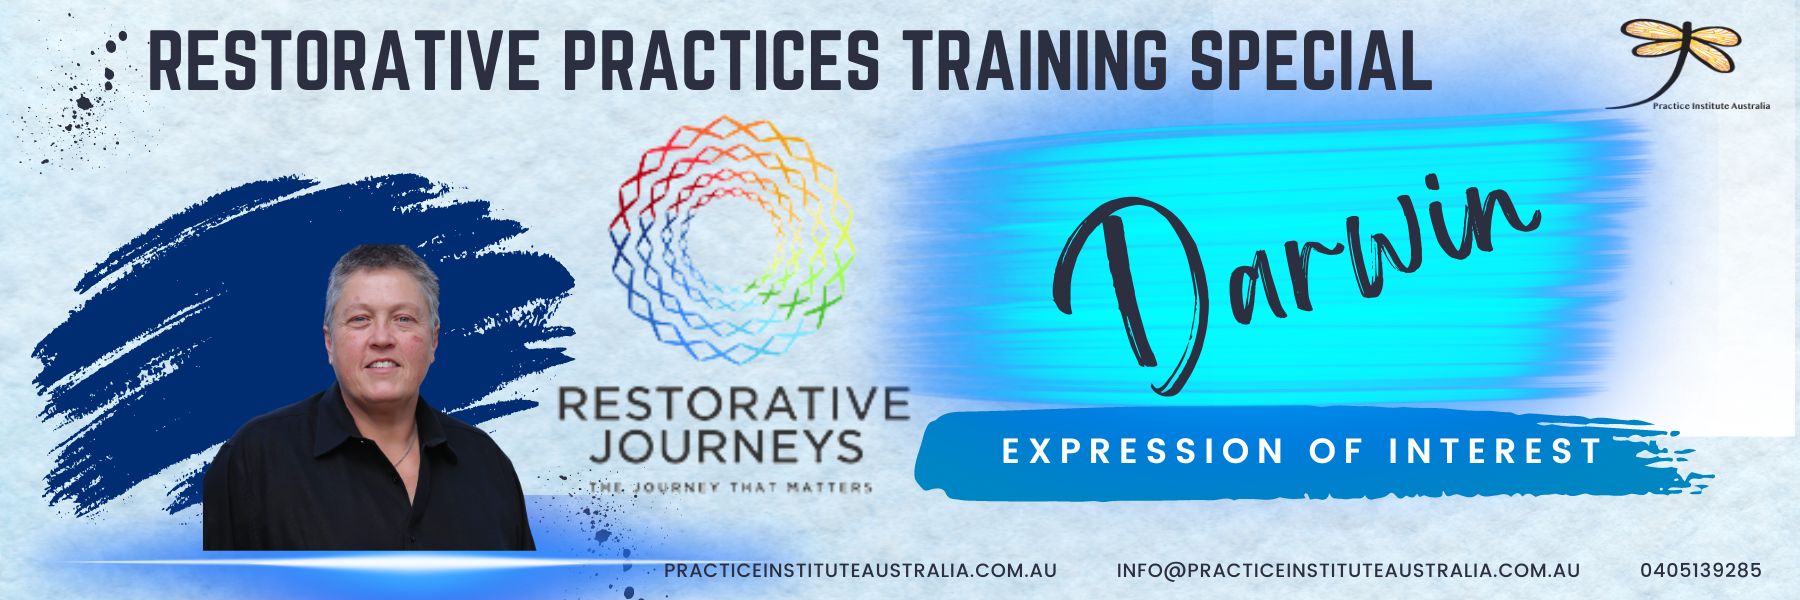 Darwin | Restorative Practices Training facilitated by Restorative Journeys-Expression Of Interest Ticket